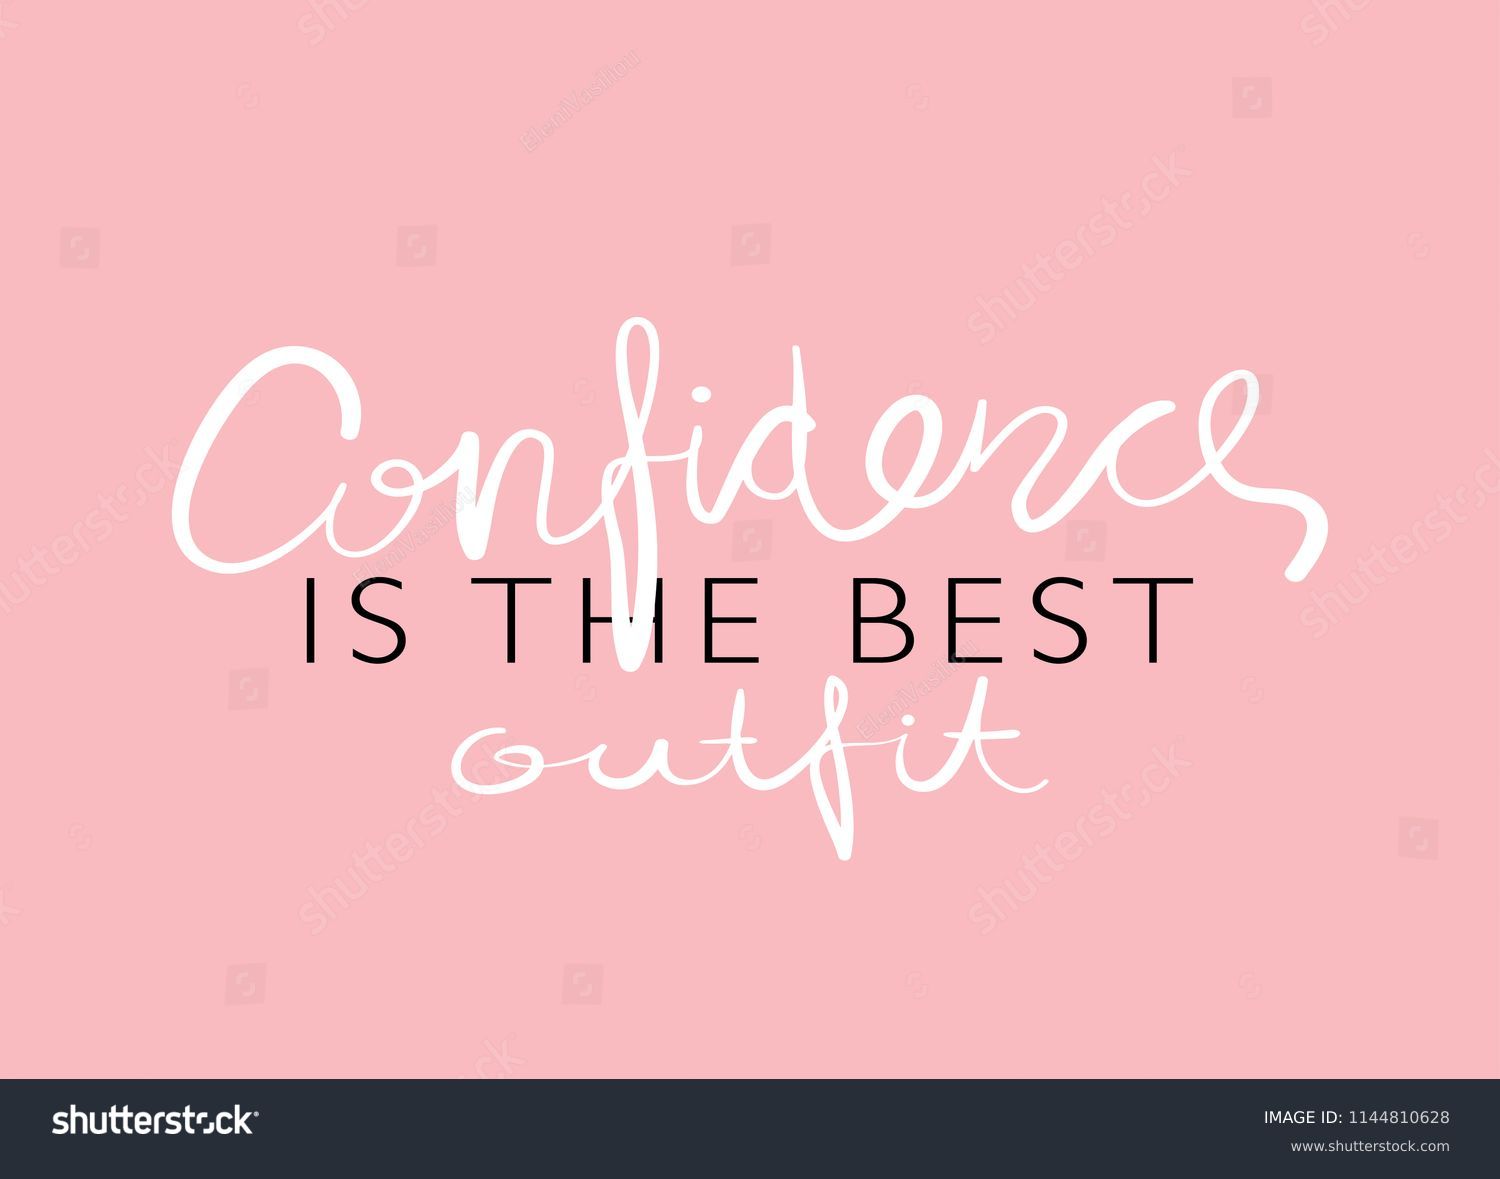 Confidence is the best outfit text / Vector illustration design for t shirt graphics, fashion prints, slogan tees, stickers, posters, cards and other creative uses.